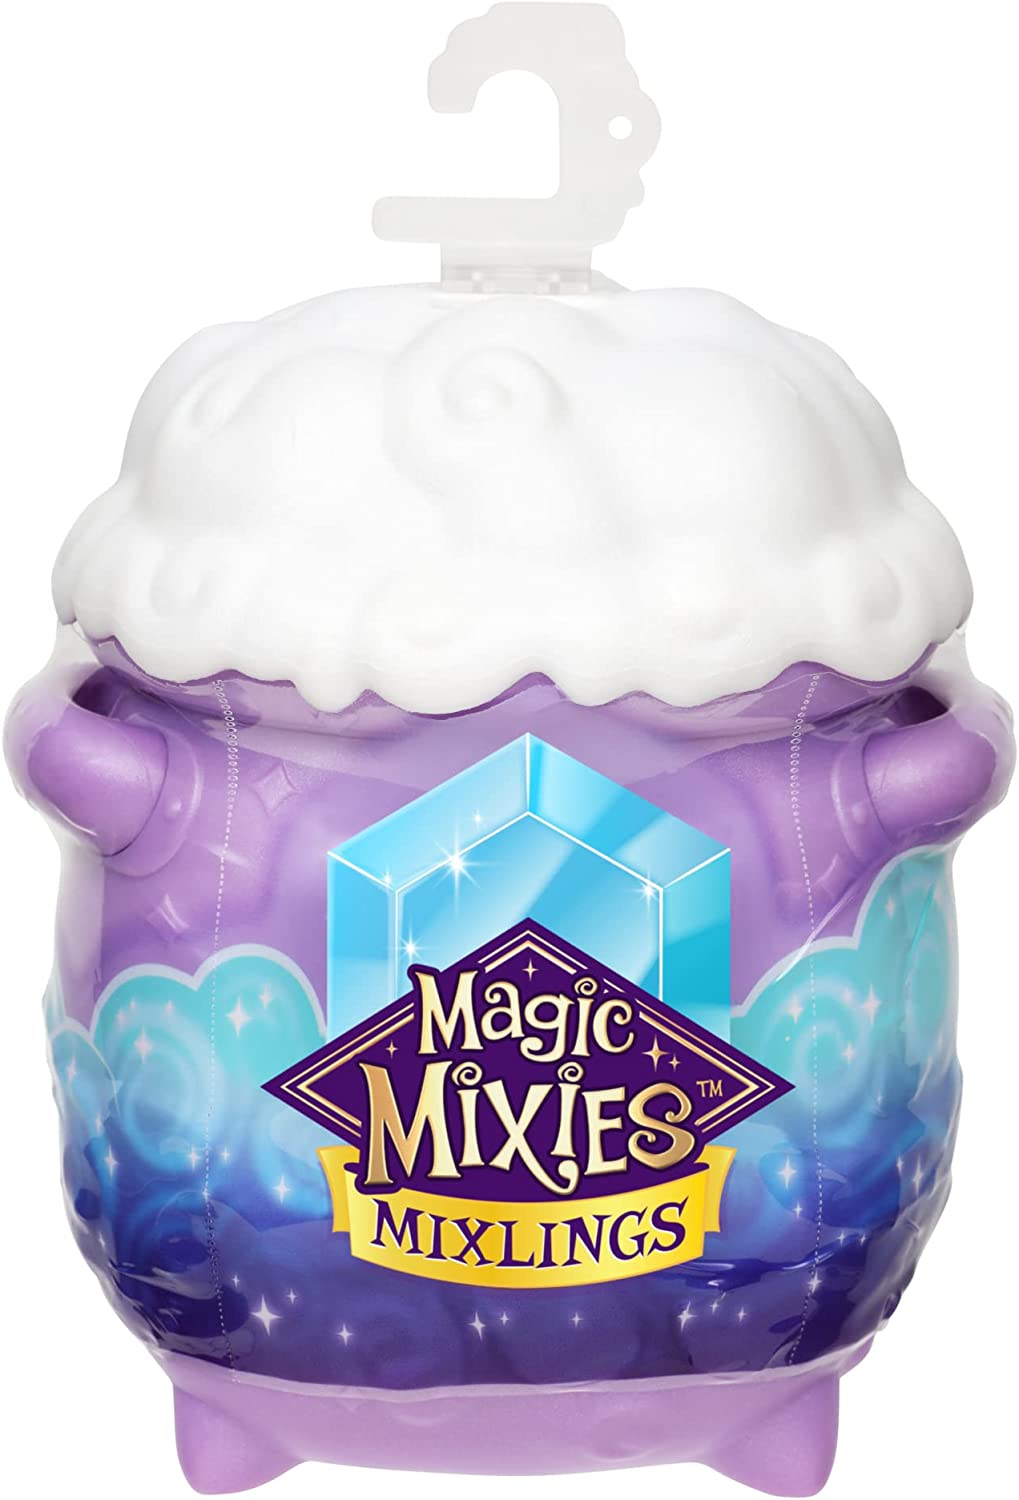 Magic Mixies Mixlings Exclusive Glitter 4 pack 